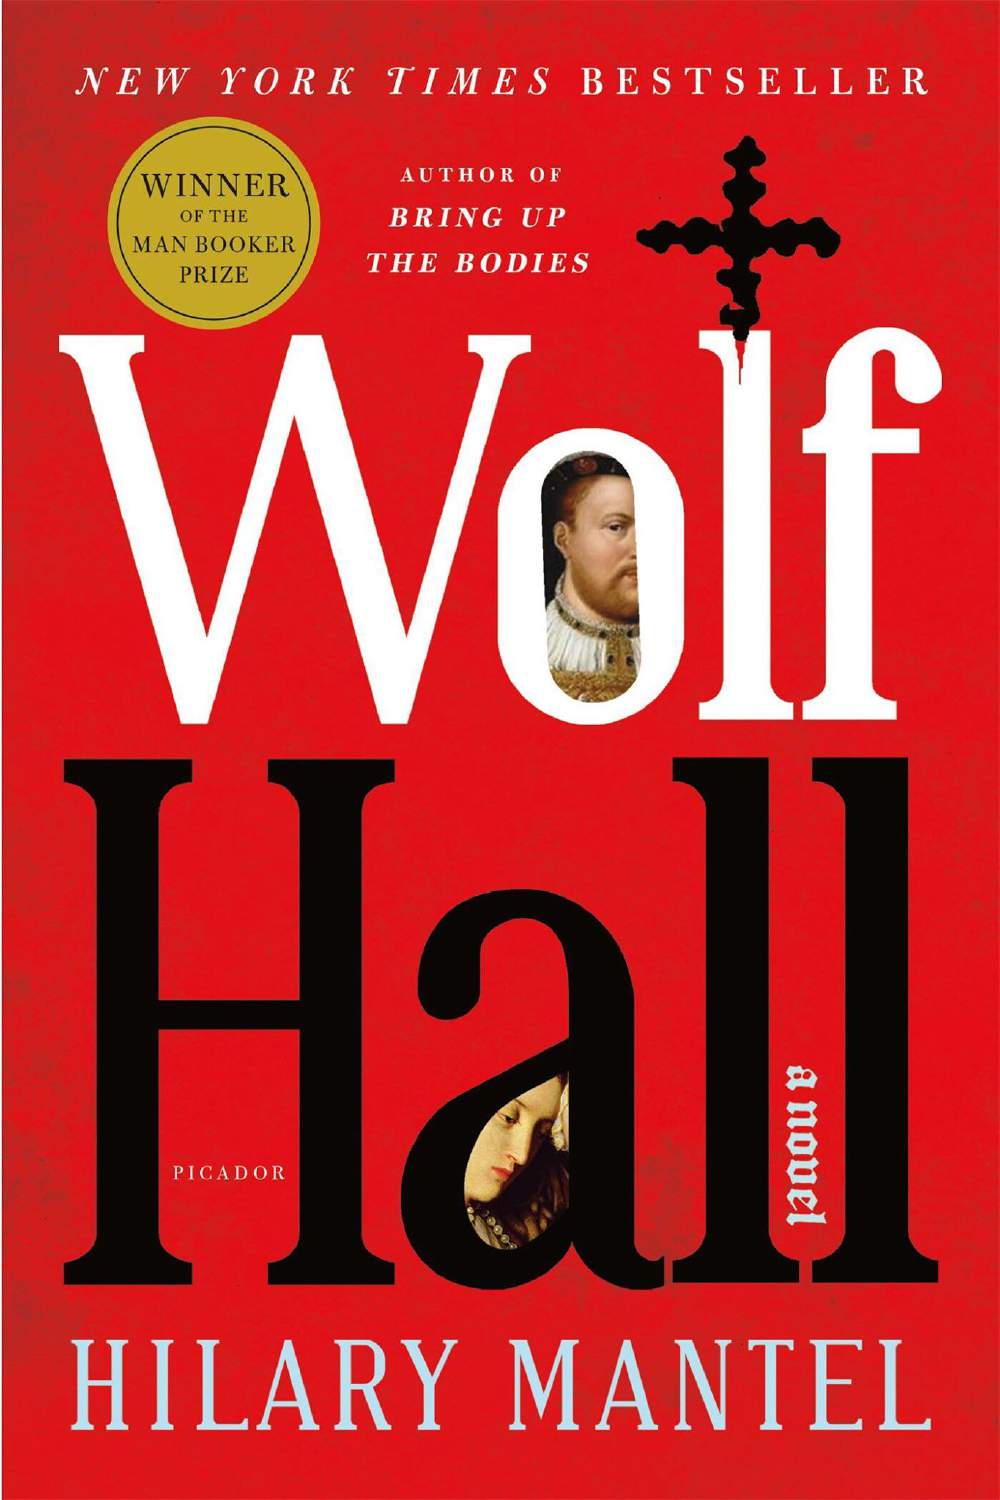 Book Review: Wolf Hall Trilogy